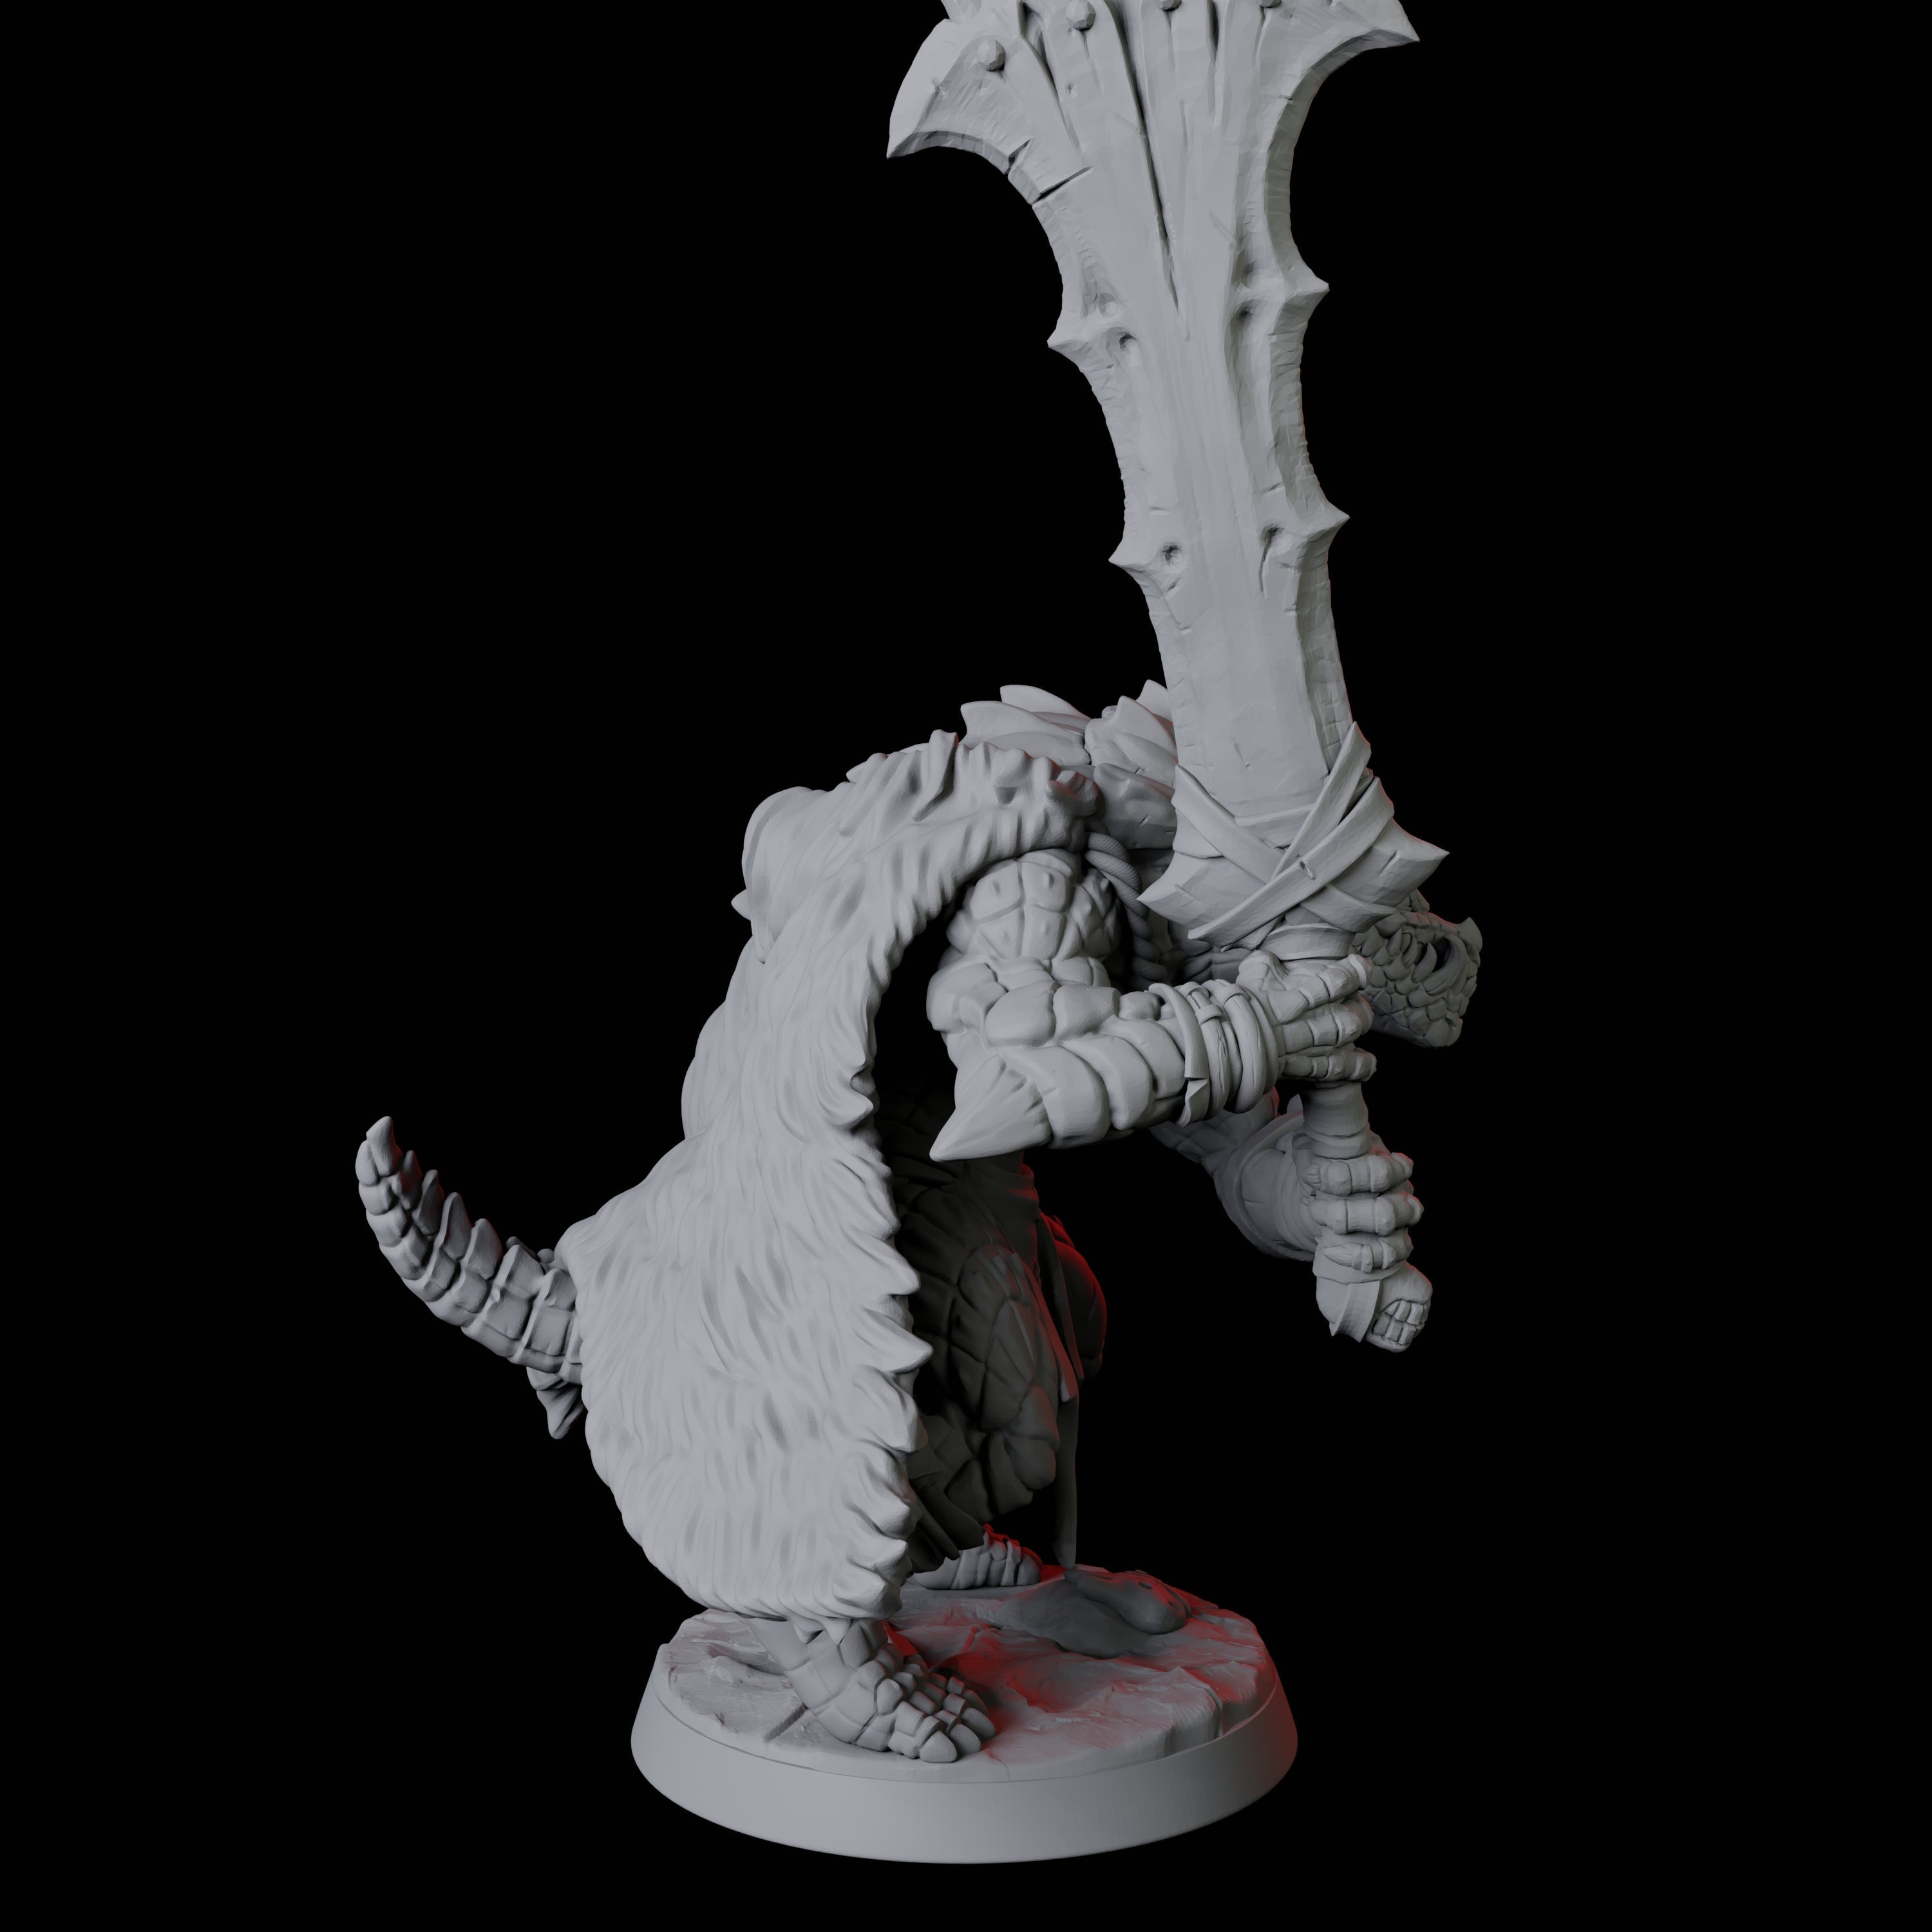 Powerful Frost Lizardfolk A Miniature for Dungeons and Dragons, Pathfinder or other TTRPGs